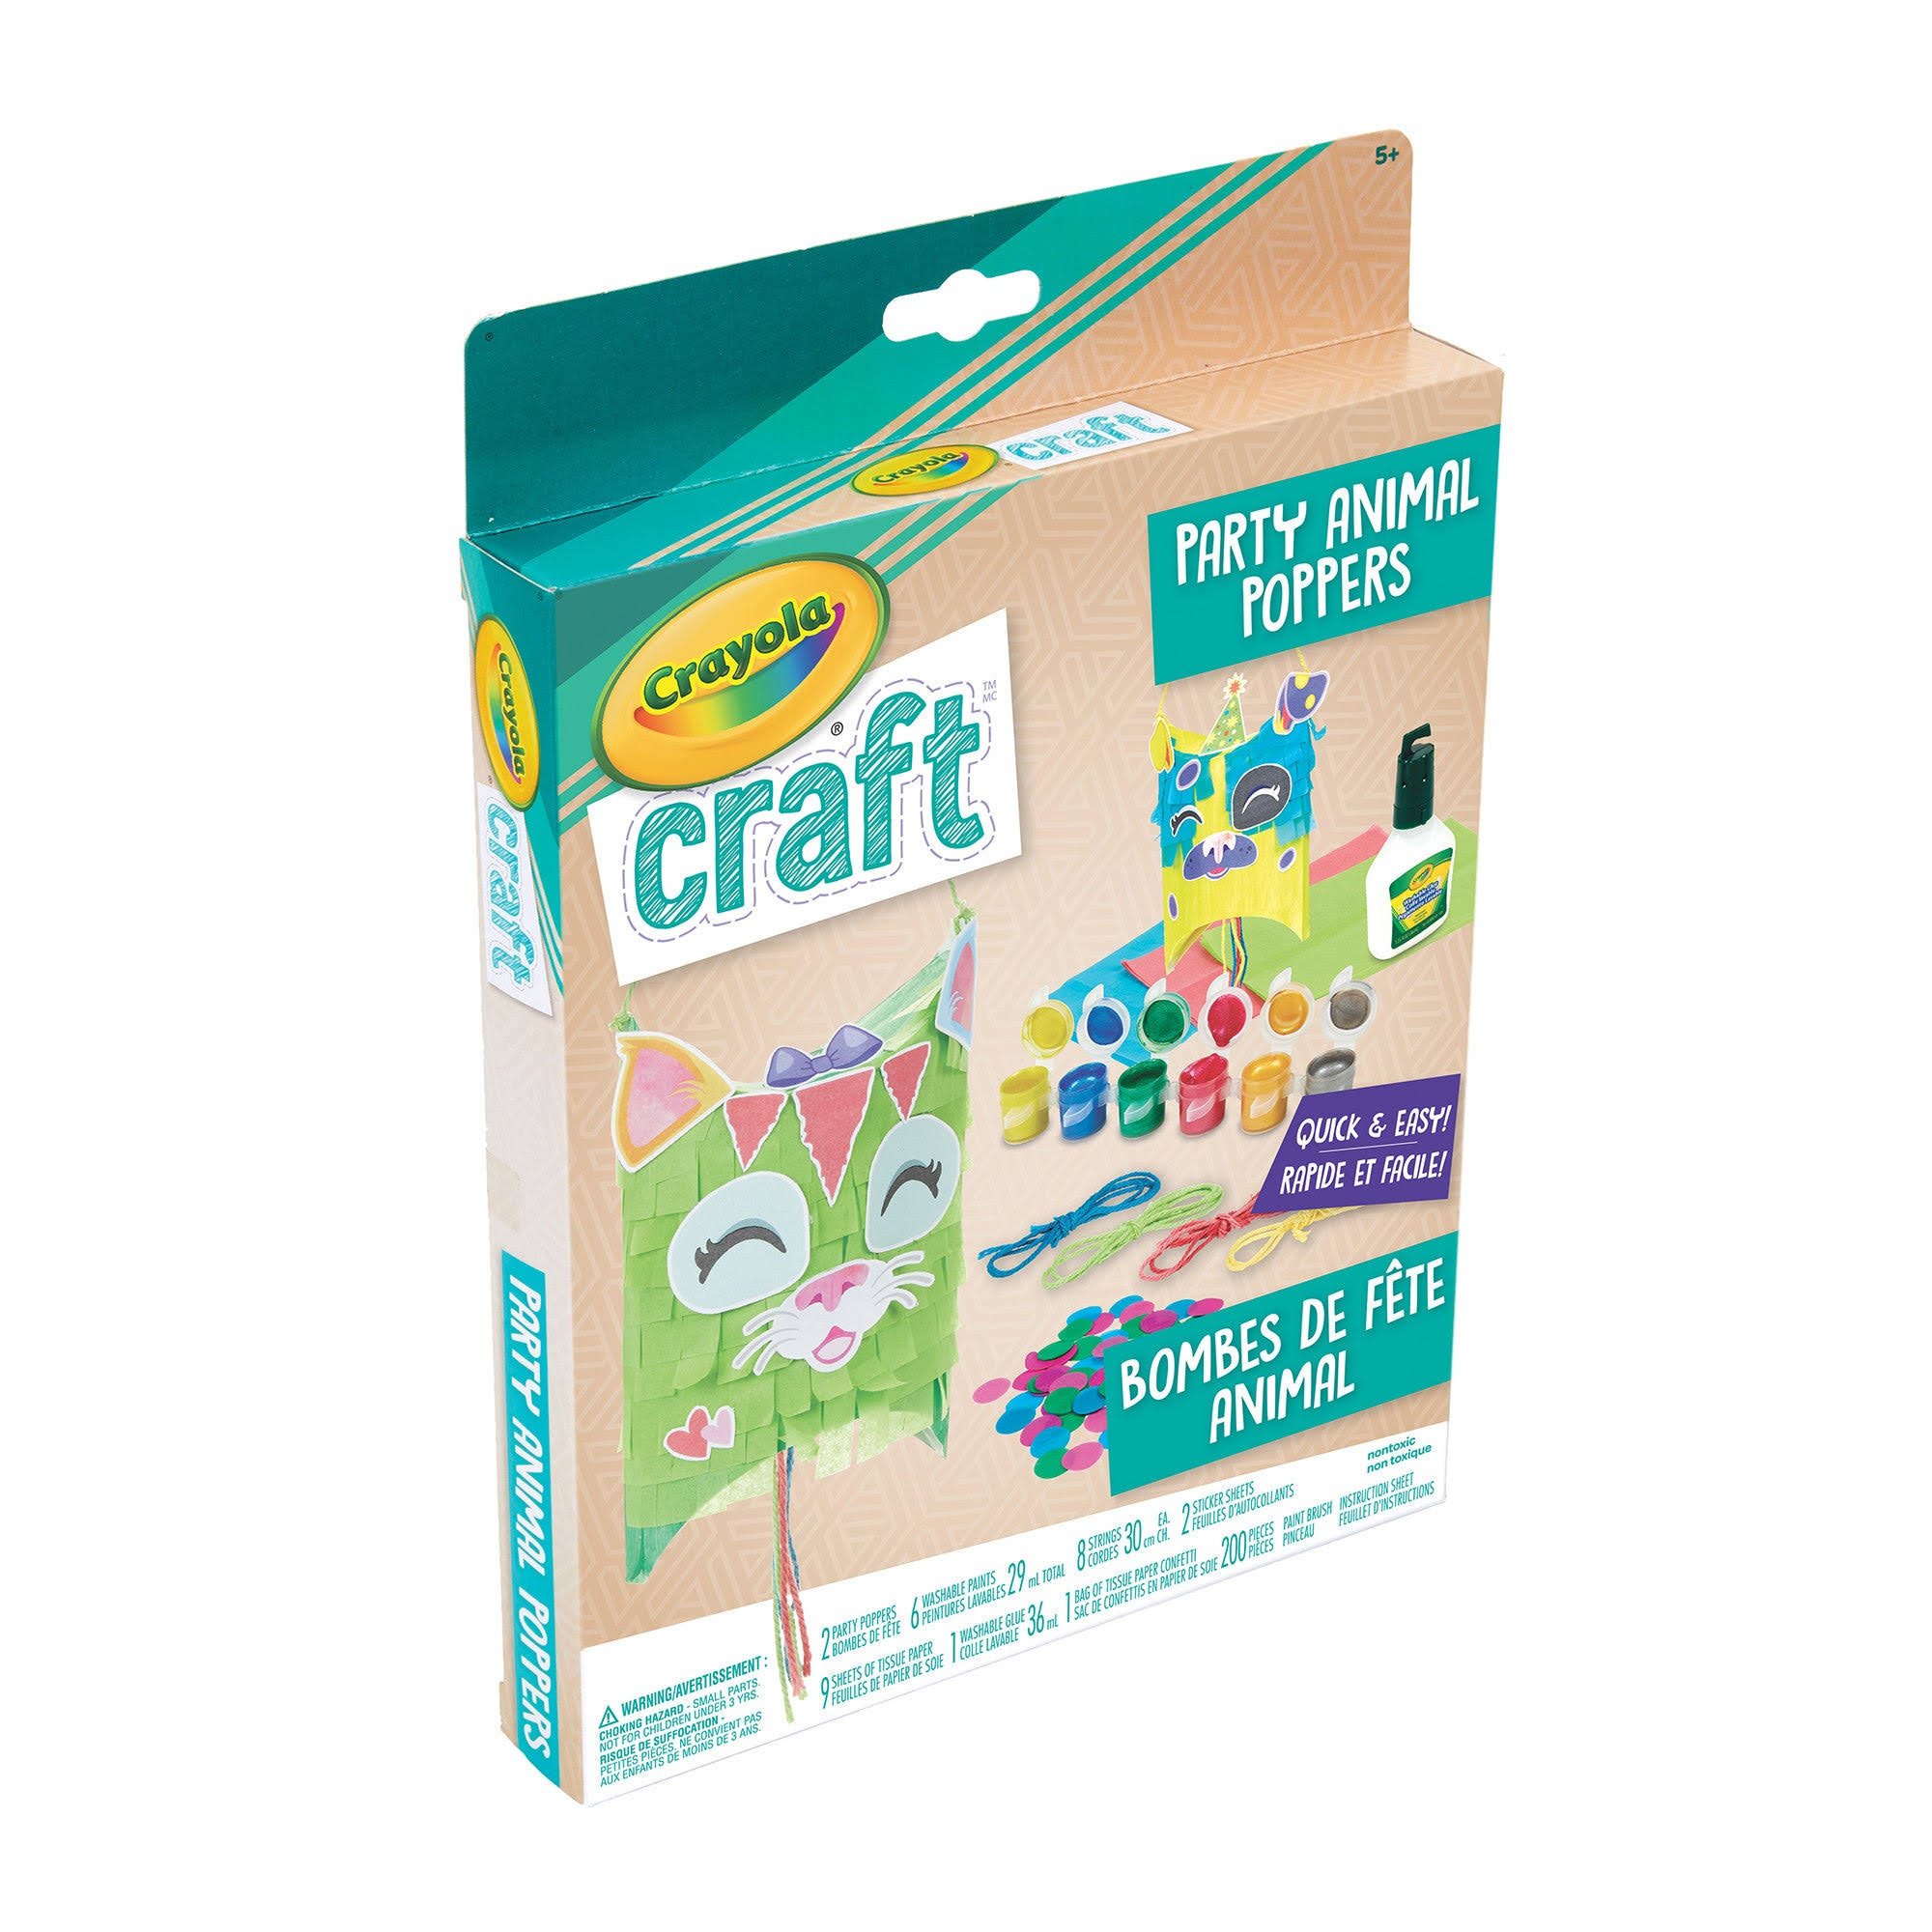 Crayola Craft Party Animal Poppers Kit